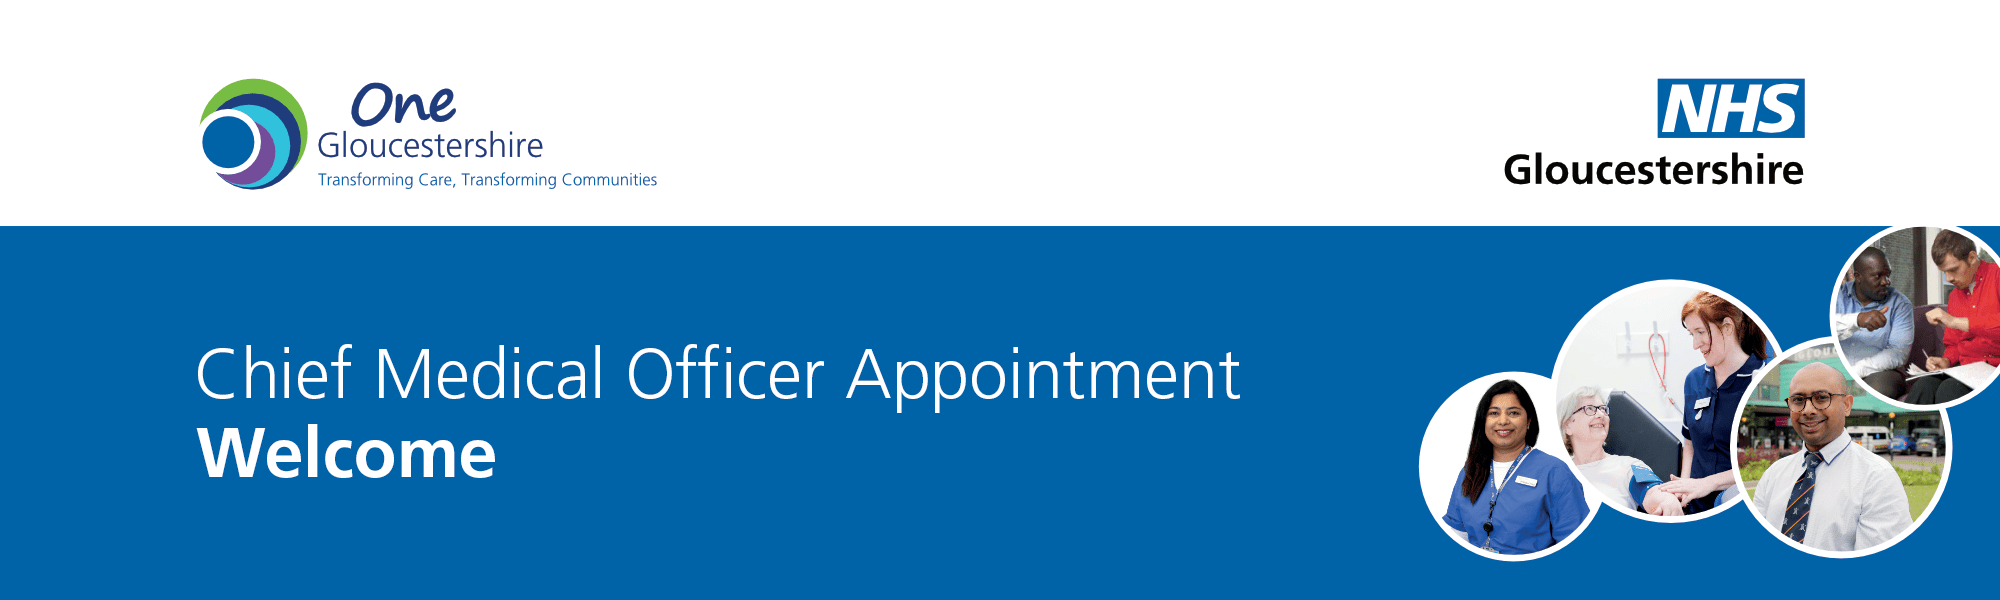 Chief Medical Officer Appointment